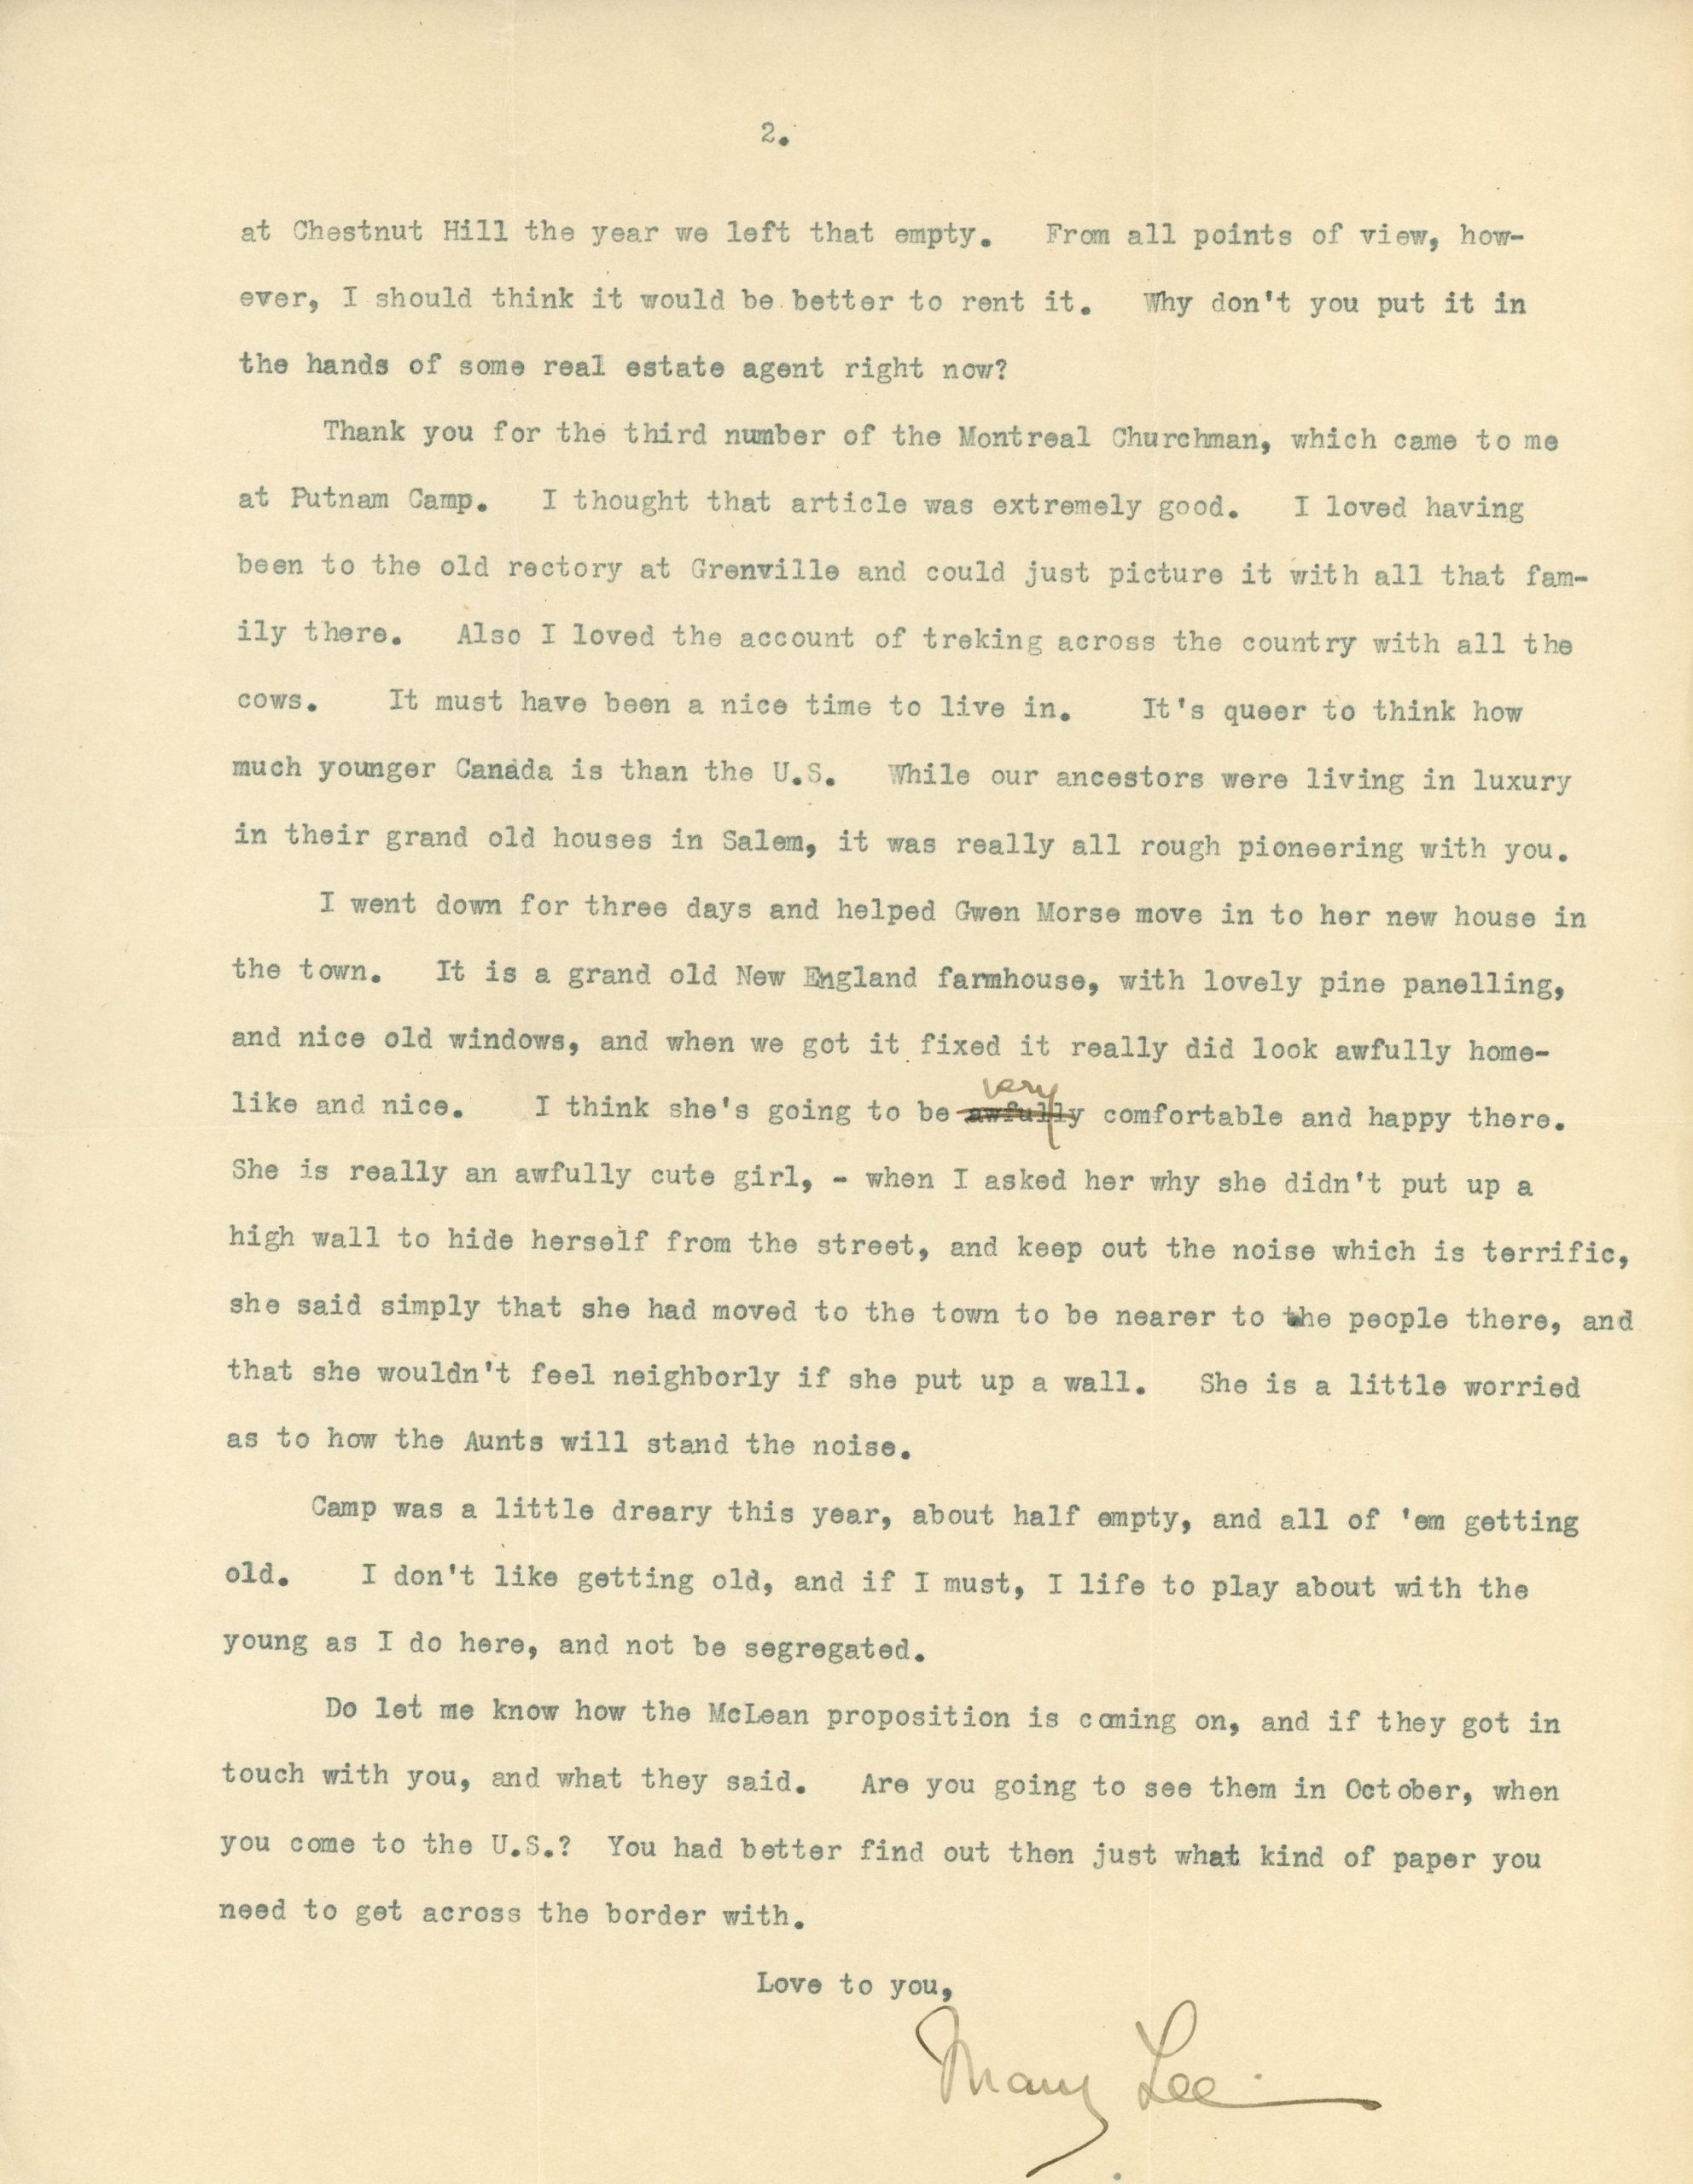 Typewritten letter from Mary Lee to Maude Abbott dated September 18, 1934, 2 pages, black ink on sepia paper. The letter discusses Alice’s admission to McLean Hospital, Elmbank, and news from the city.